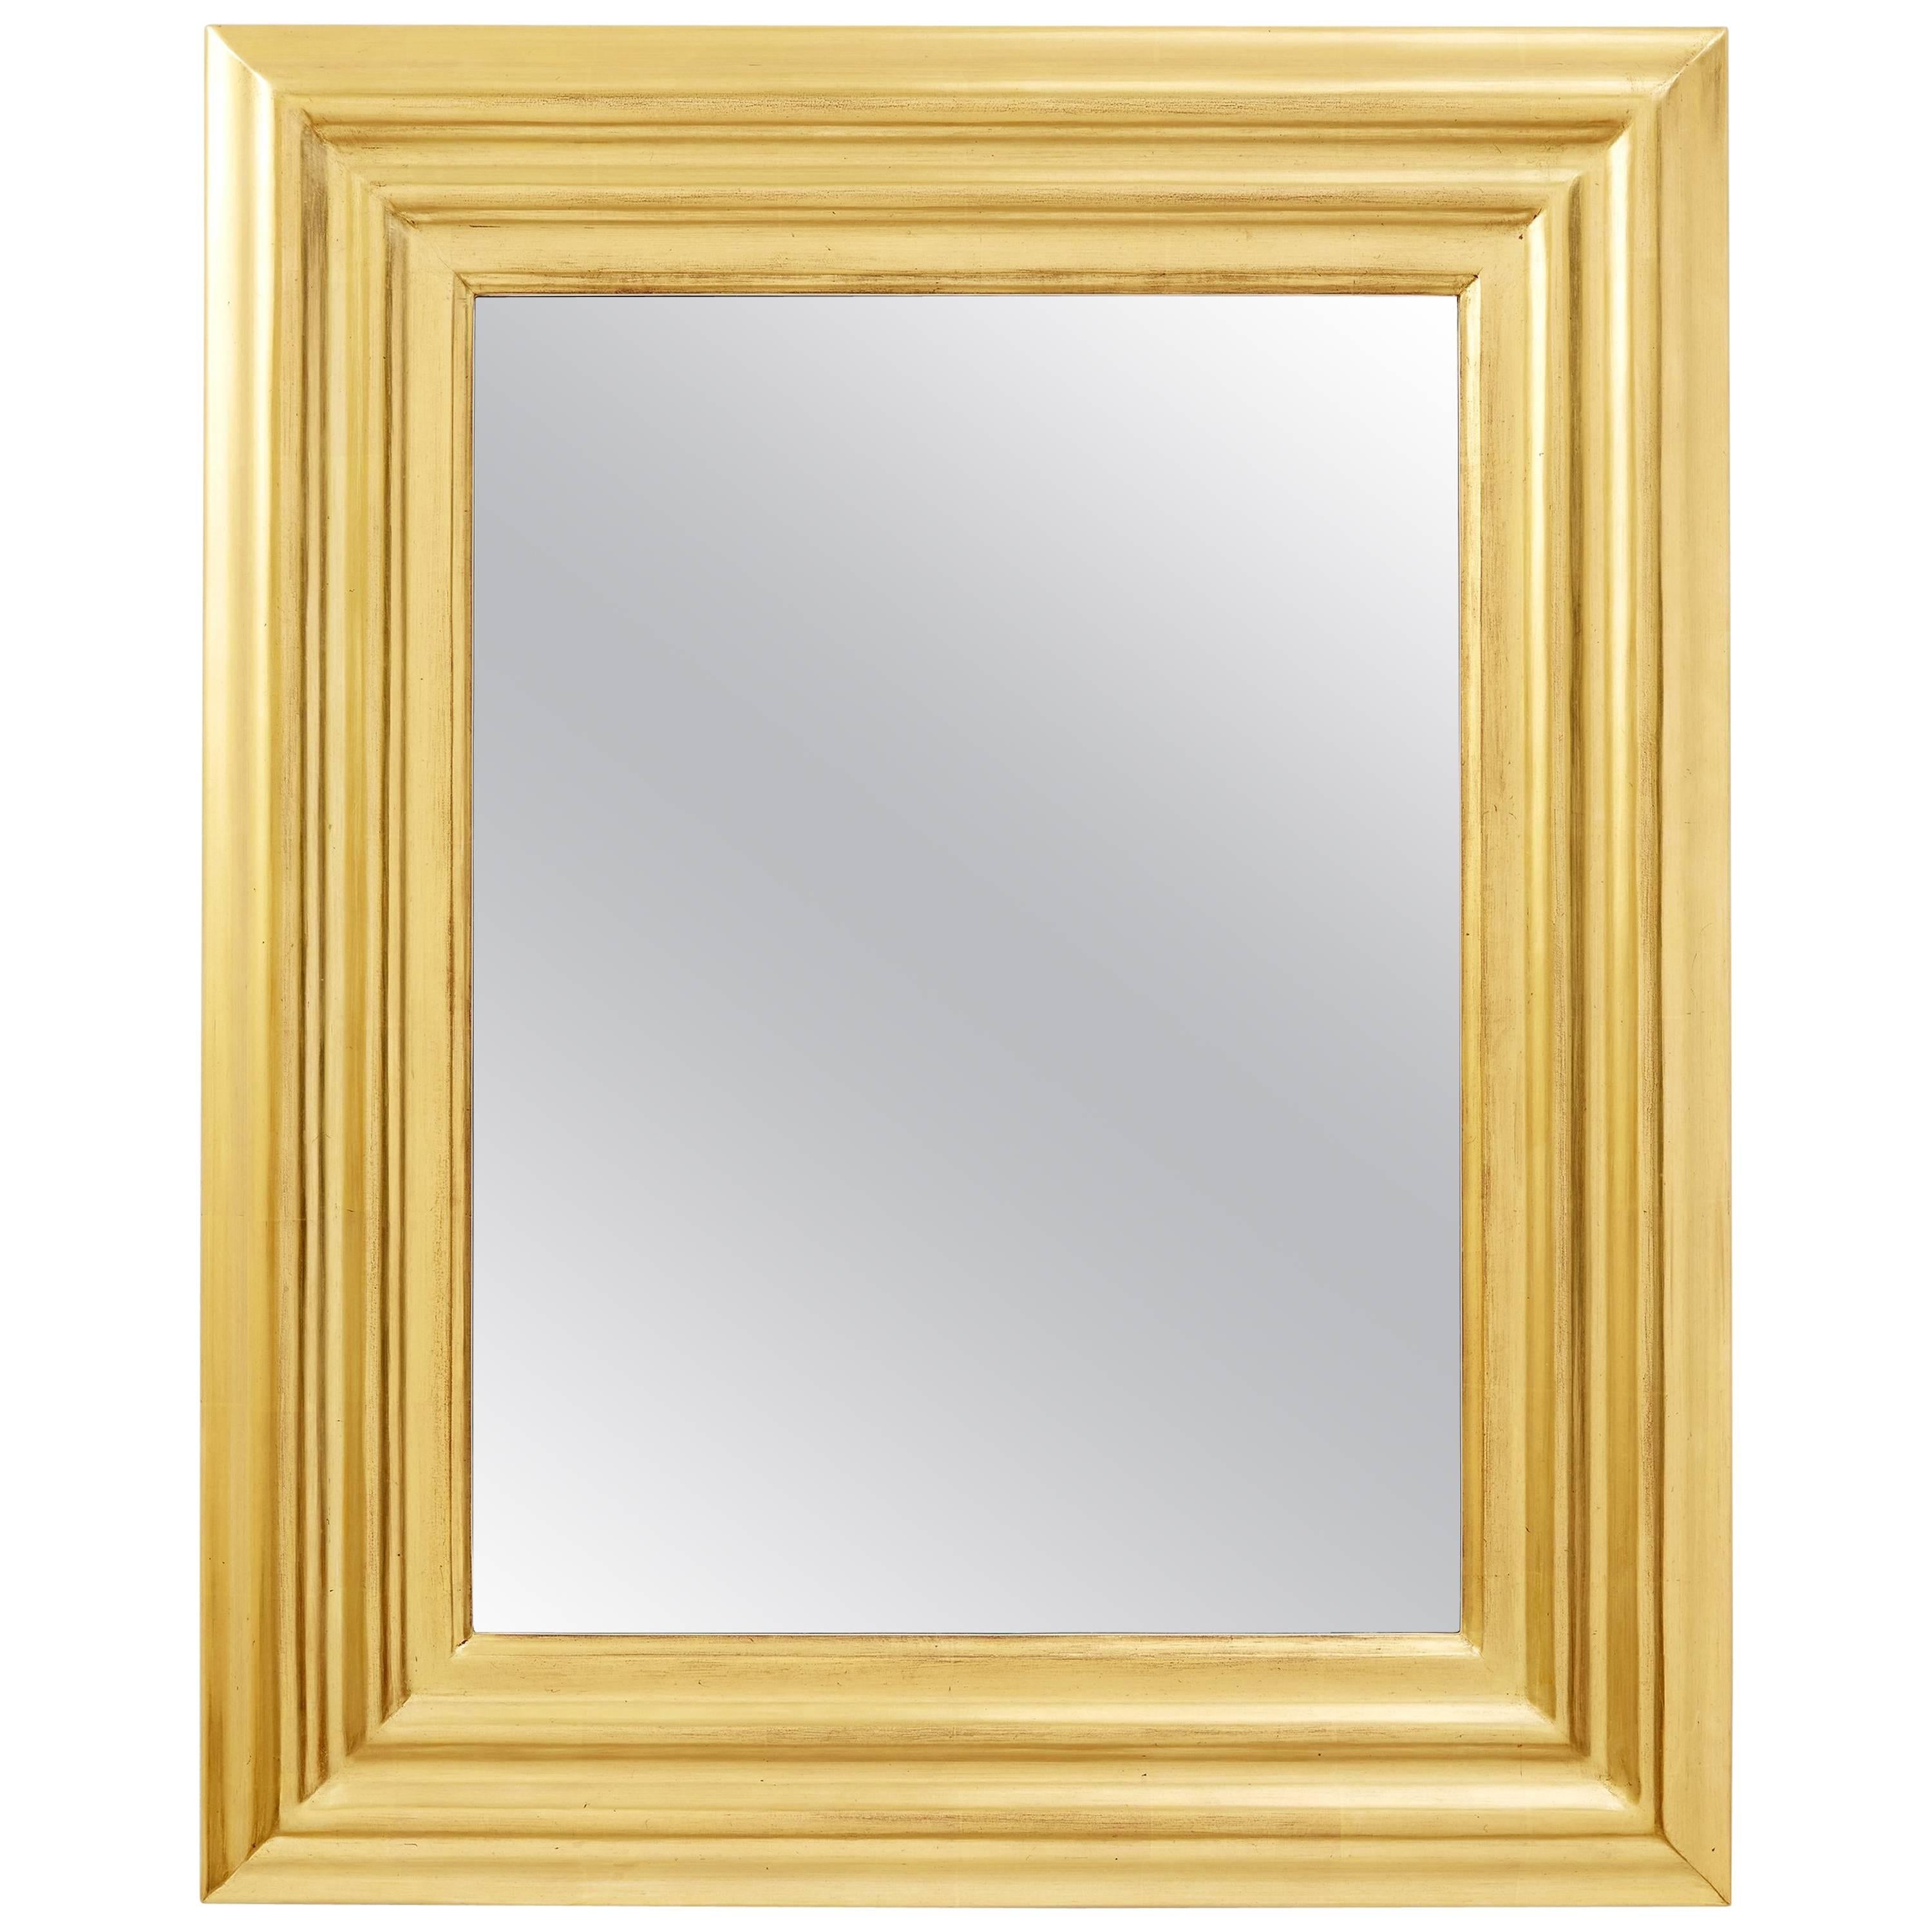 Degas No. 6 Ripple Wall Mirror, Gilded in 23kt Yellow Gold, by Bark Frameworks For Sale